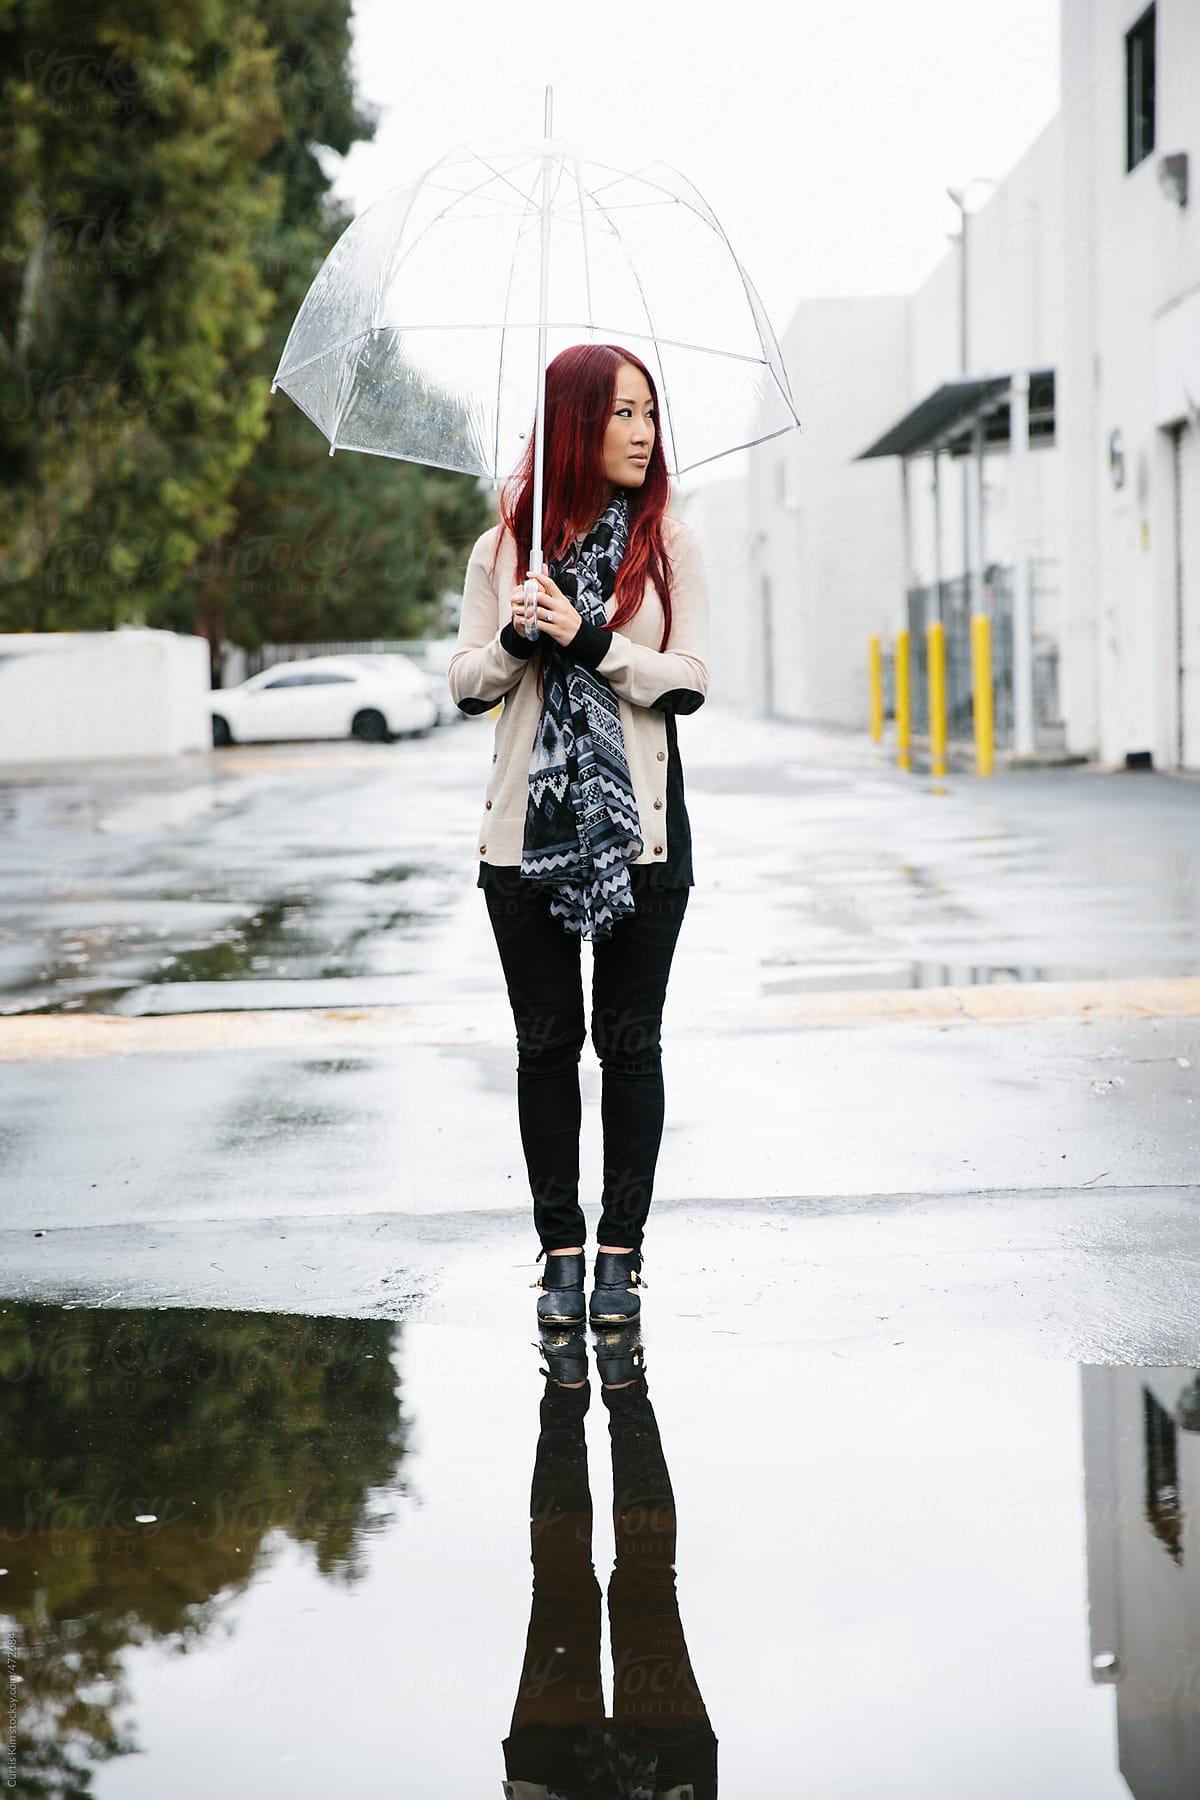 Woman with red hair holding an umbrella